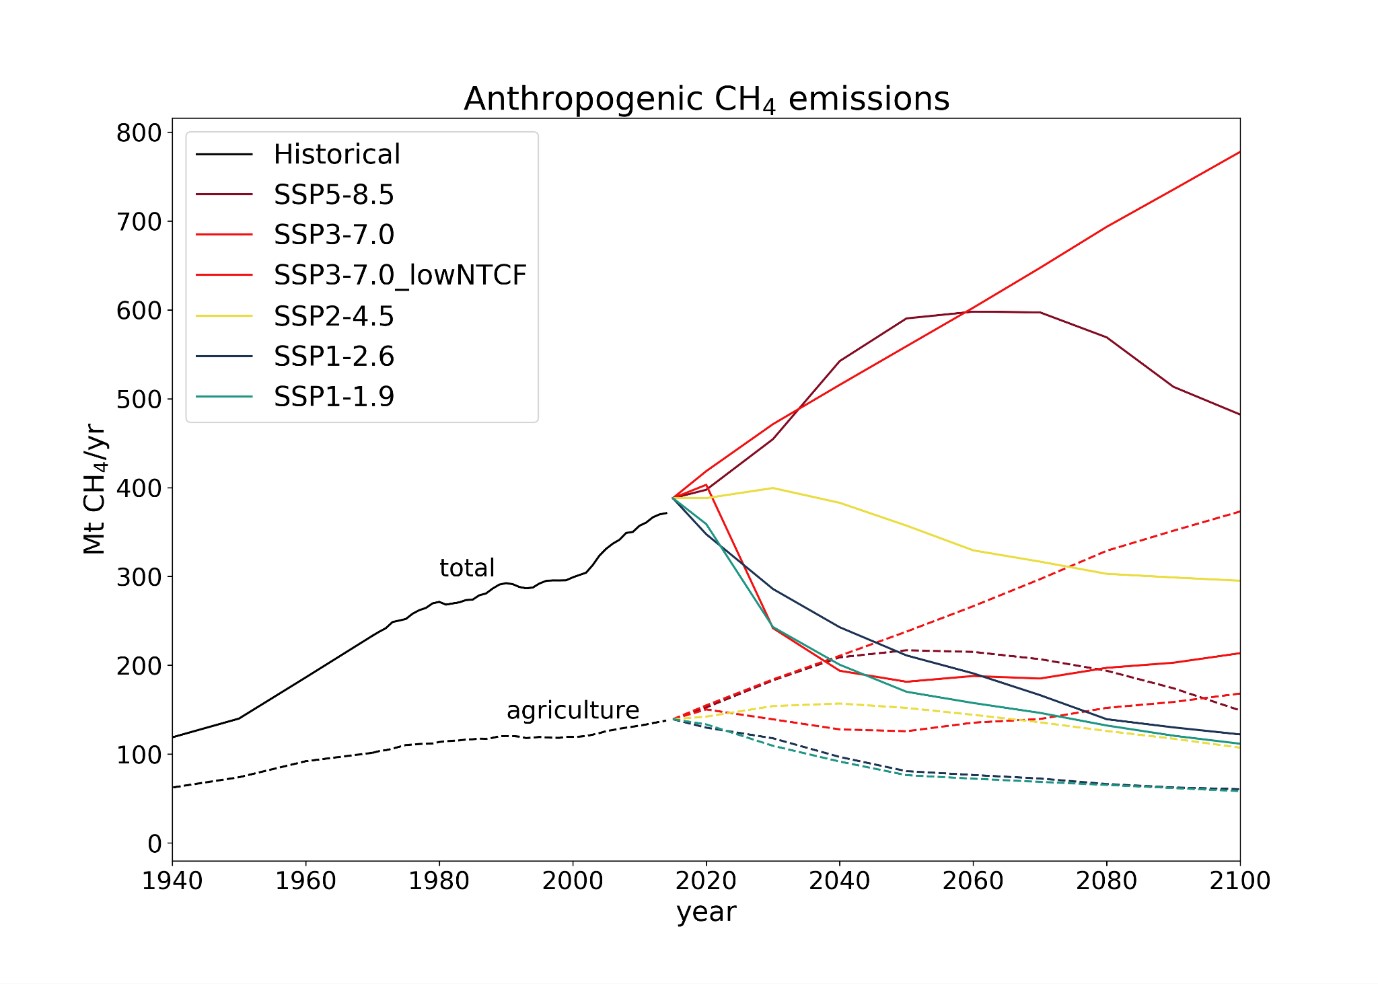 Figure 1. Global anthropogenic CH4 emissions (Mt CH4 yr-1) for the recent past and up to 2100 following future socio-economic scenarios. Black lines show historical estimates; coloured lines show future projected emissions under the different scenarios; solid lines denote anthropogenic total emissions; dashed lines show emissions from agriculture alone. Reproduced from Figure 1 of Jackson et al.